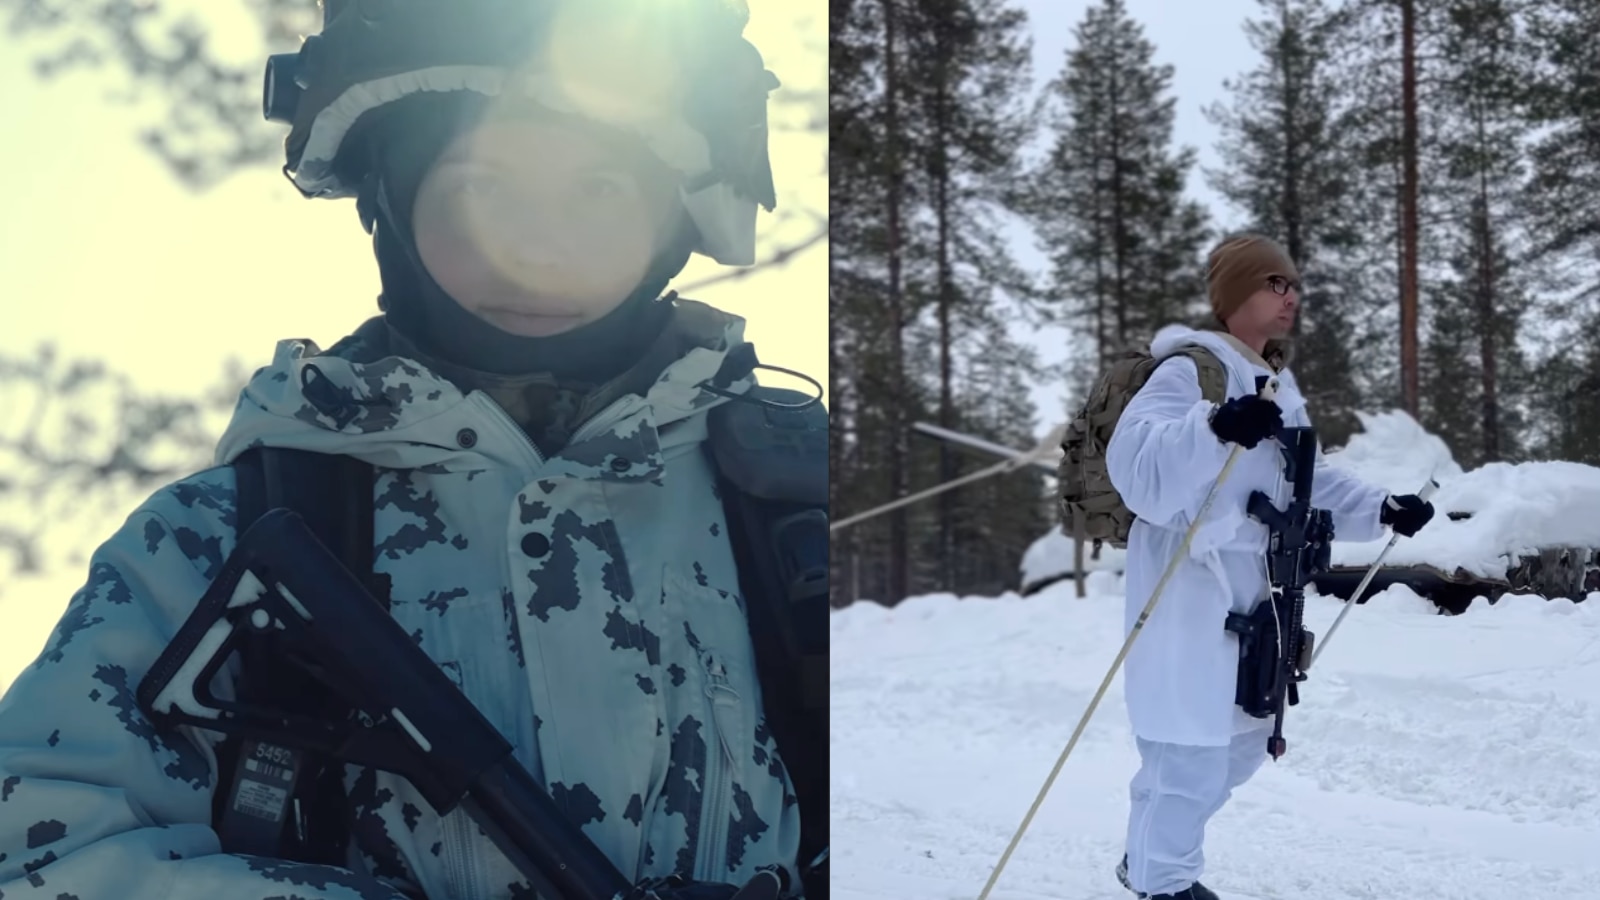 finnish-army’s-winter-uniforms-make-us-army-digs-look-like-trash-bags